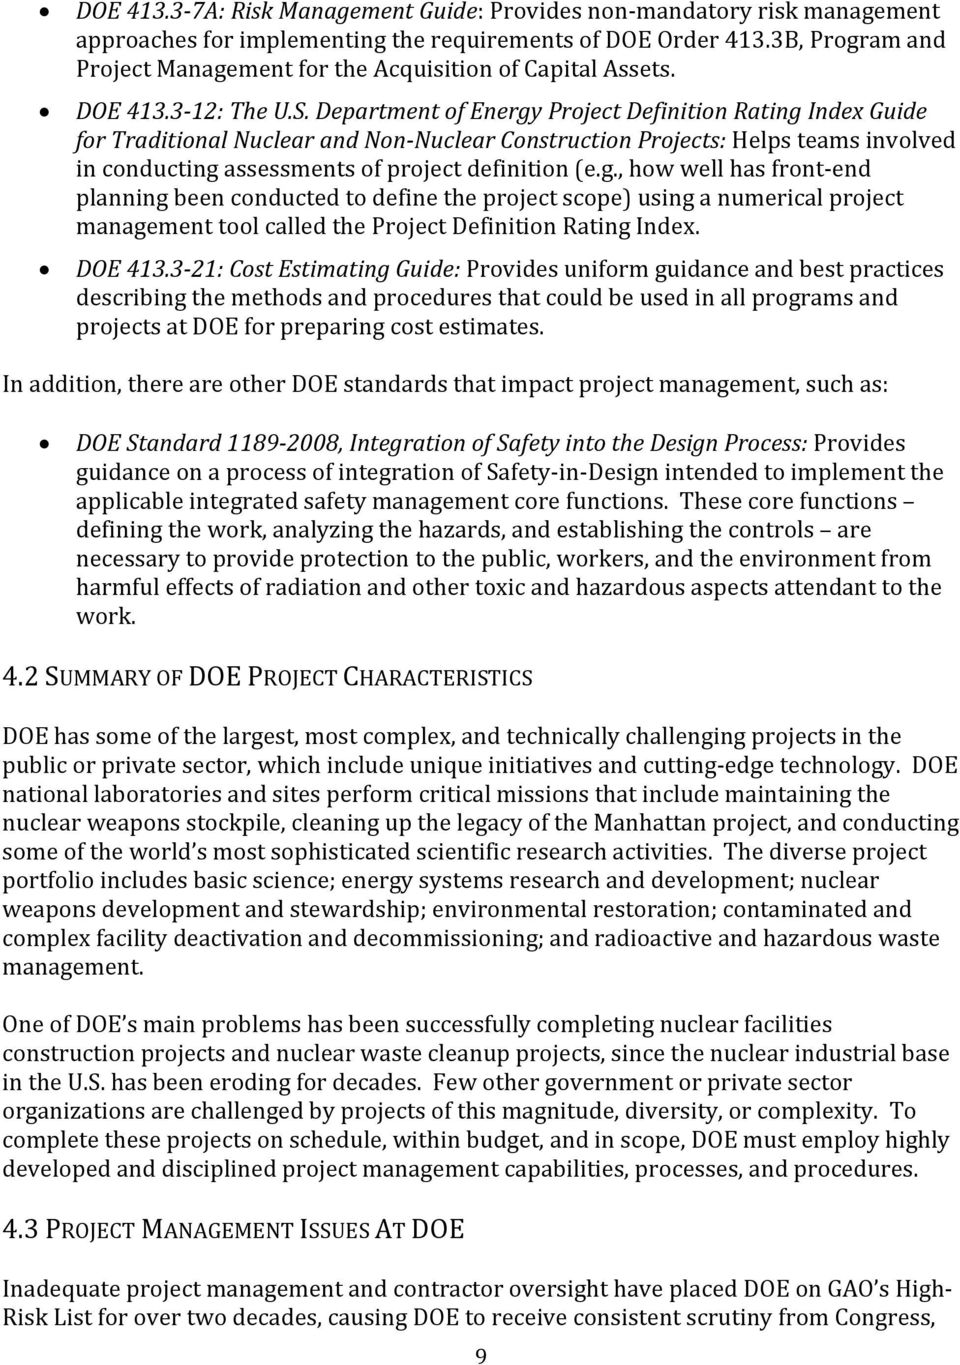 Department of Energy Project Definition Rating Index Guide for Traditional Nuclear and Non Nuclear Construction Projects: Helps teams involved in conducting assessments of project definition (e.g., how well has front end planning been conducted to define the project scope) using a numerical project management tool called the Project Definition Rating Index.